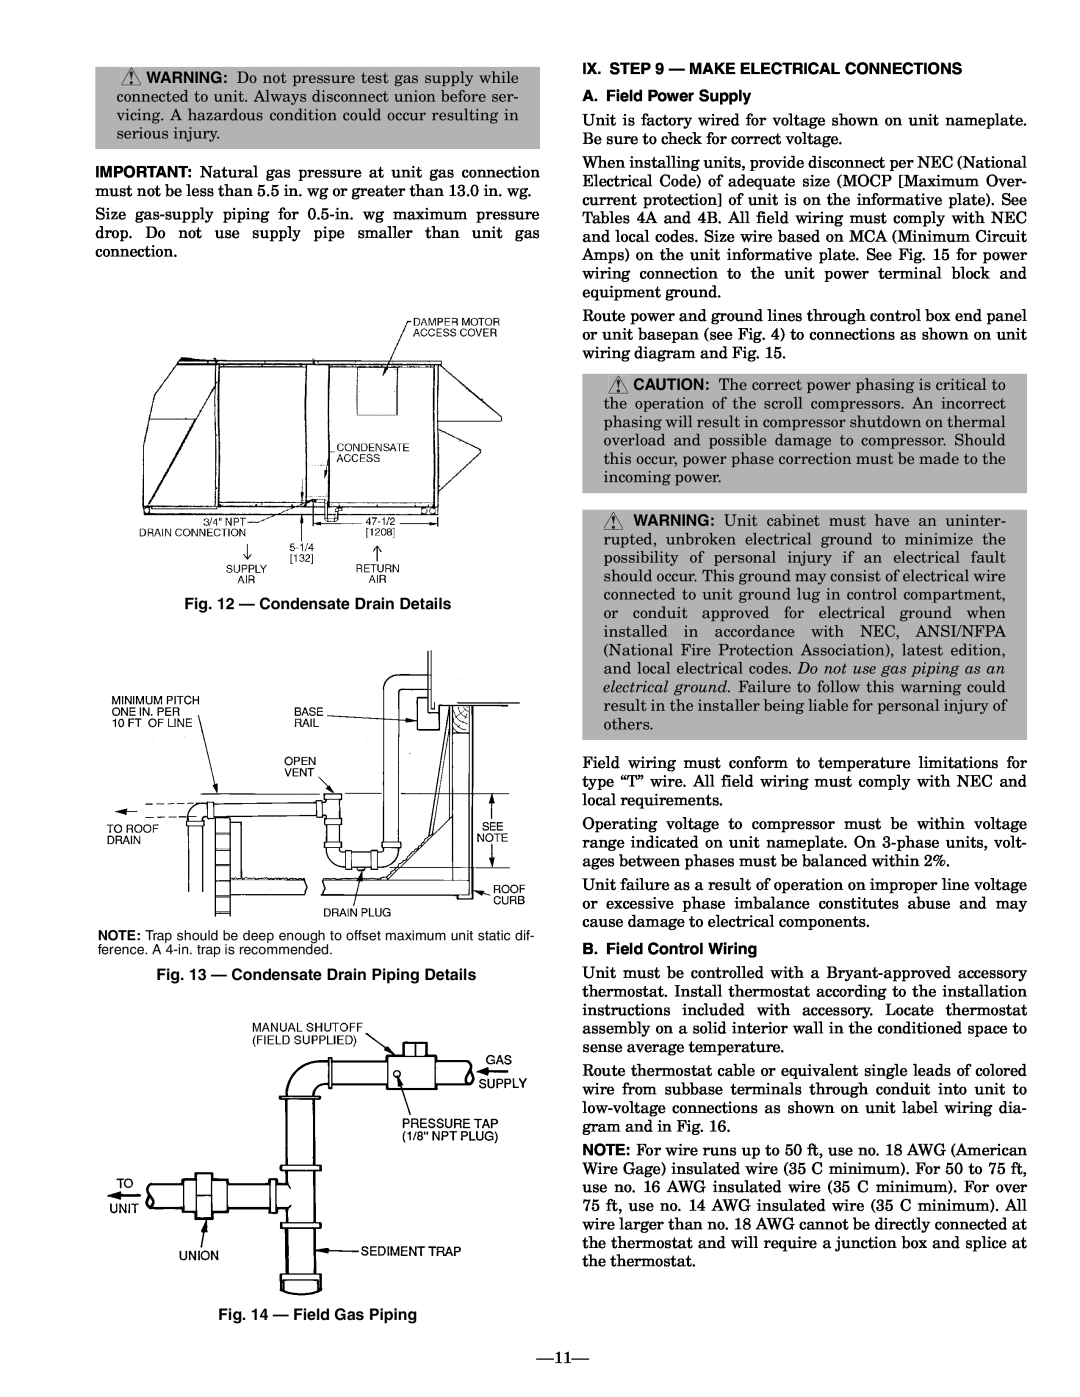 Bryant 581A Condensate Drain Details, Condensate Drain Piping Details, Field Gas Piping, Ix. - Make Electrical Connections 